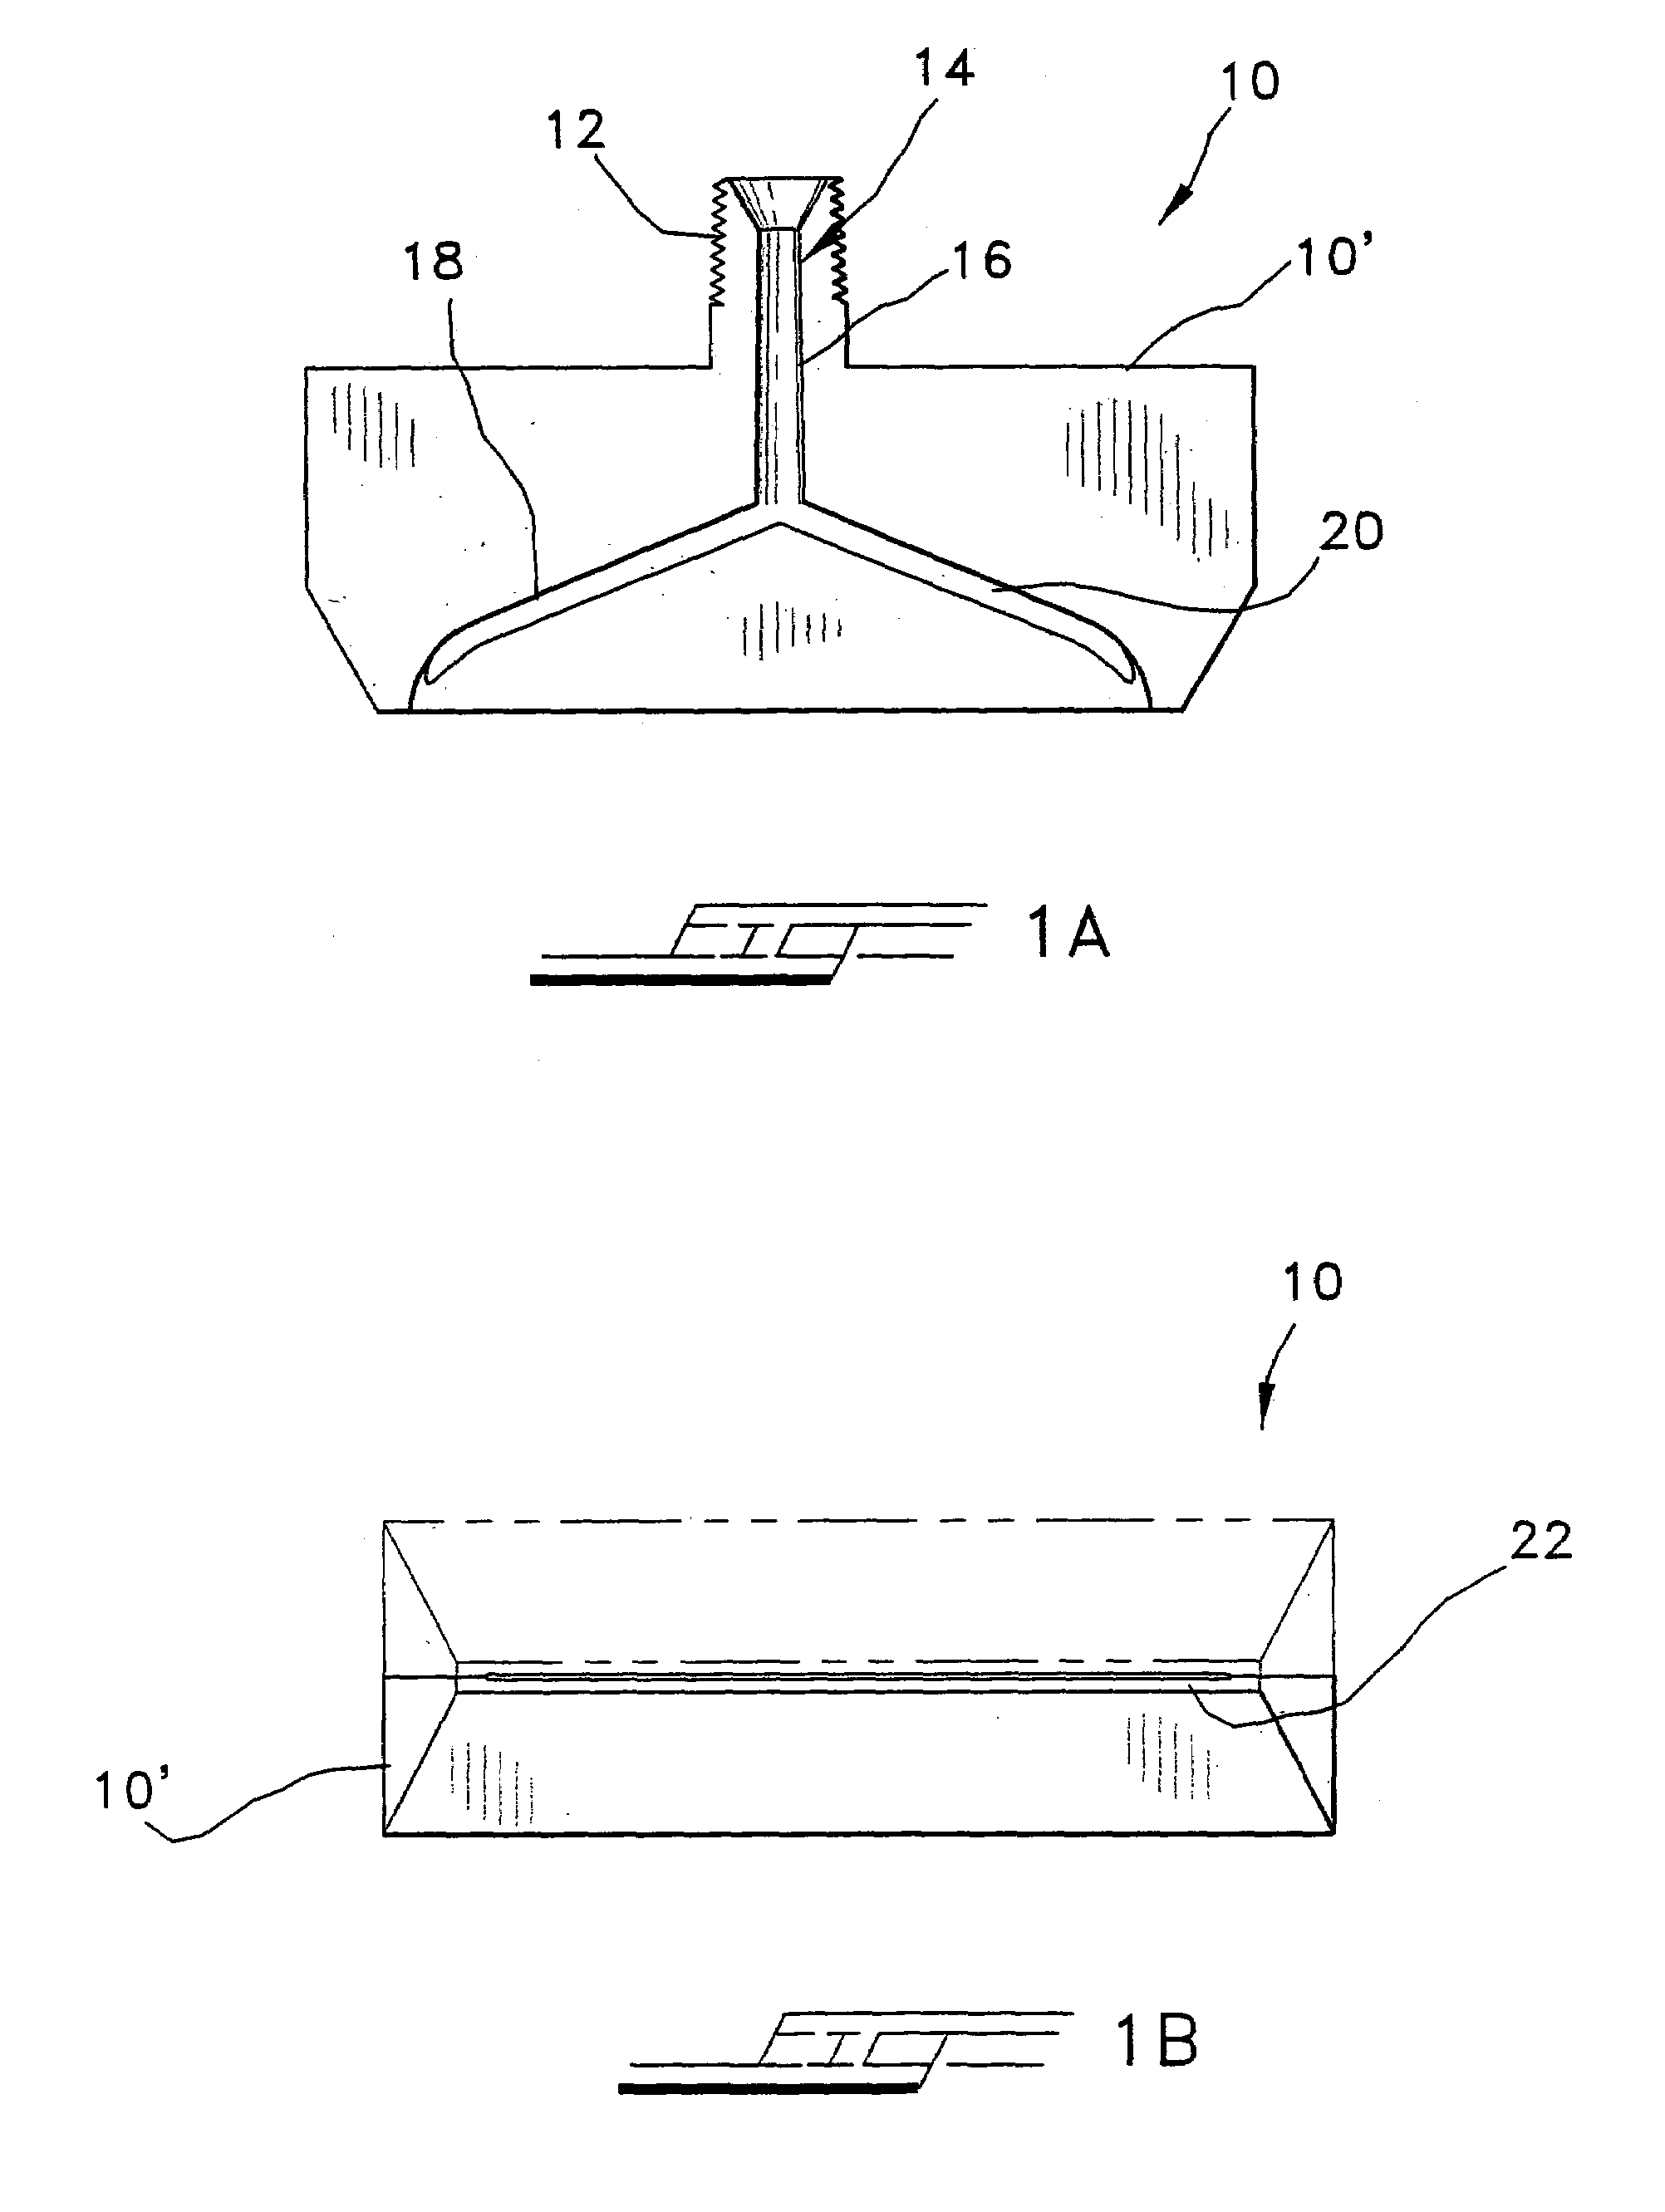 Nozzle for use in rotational casting apparatus